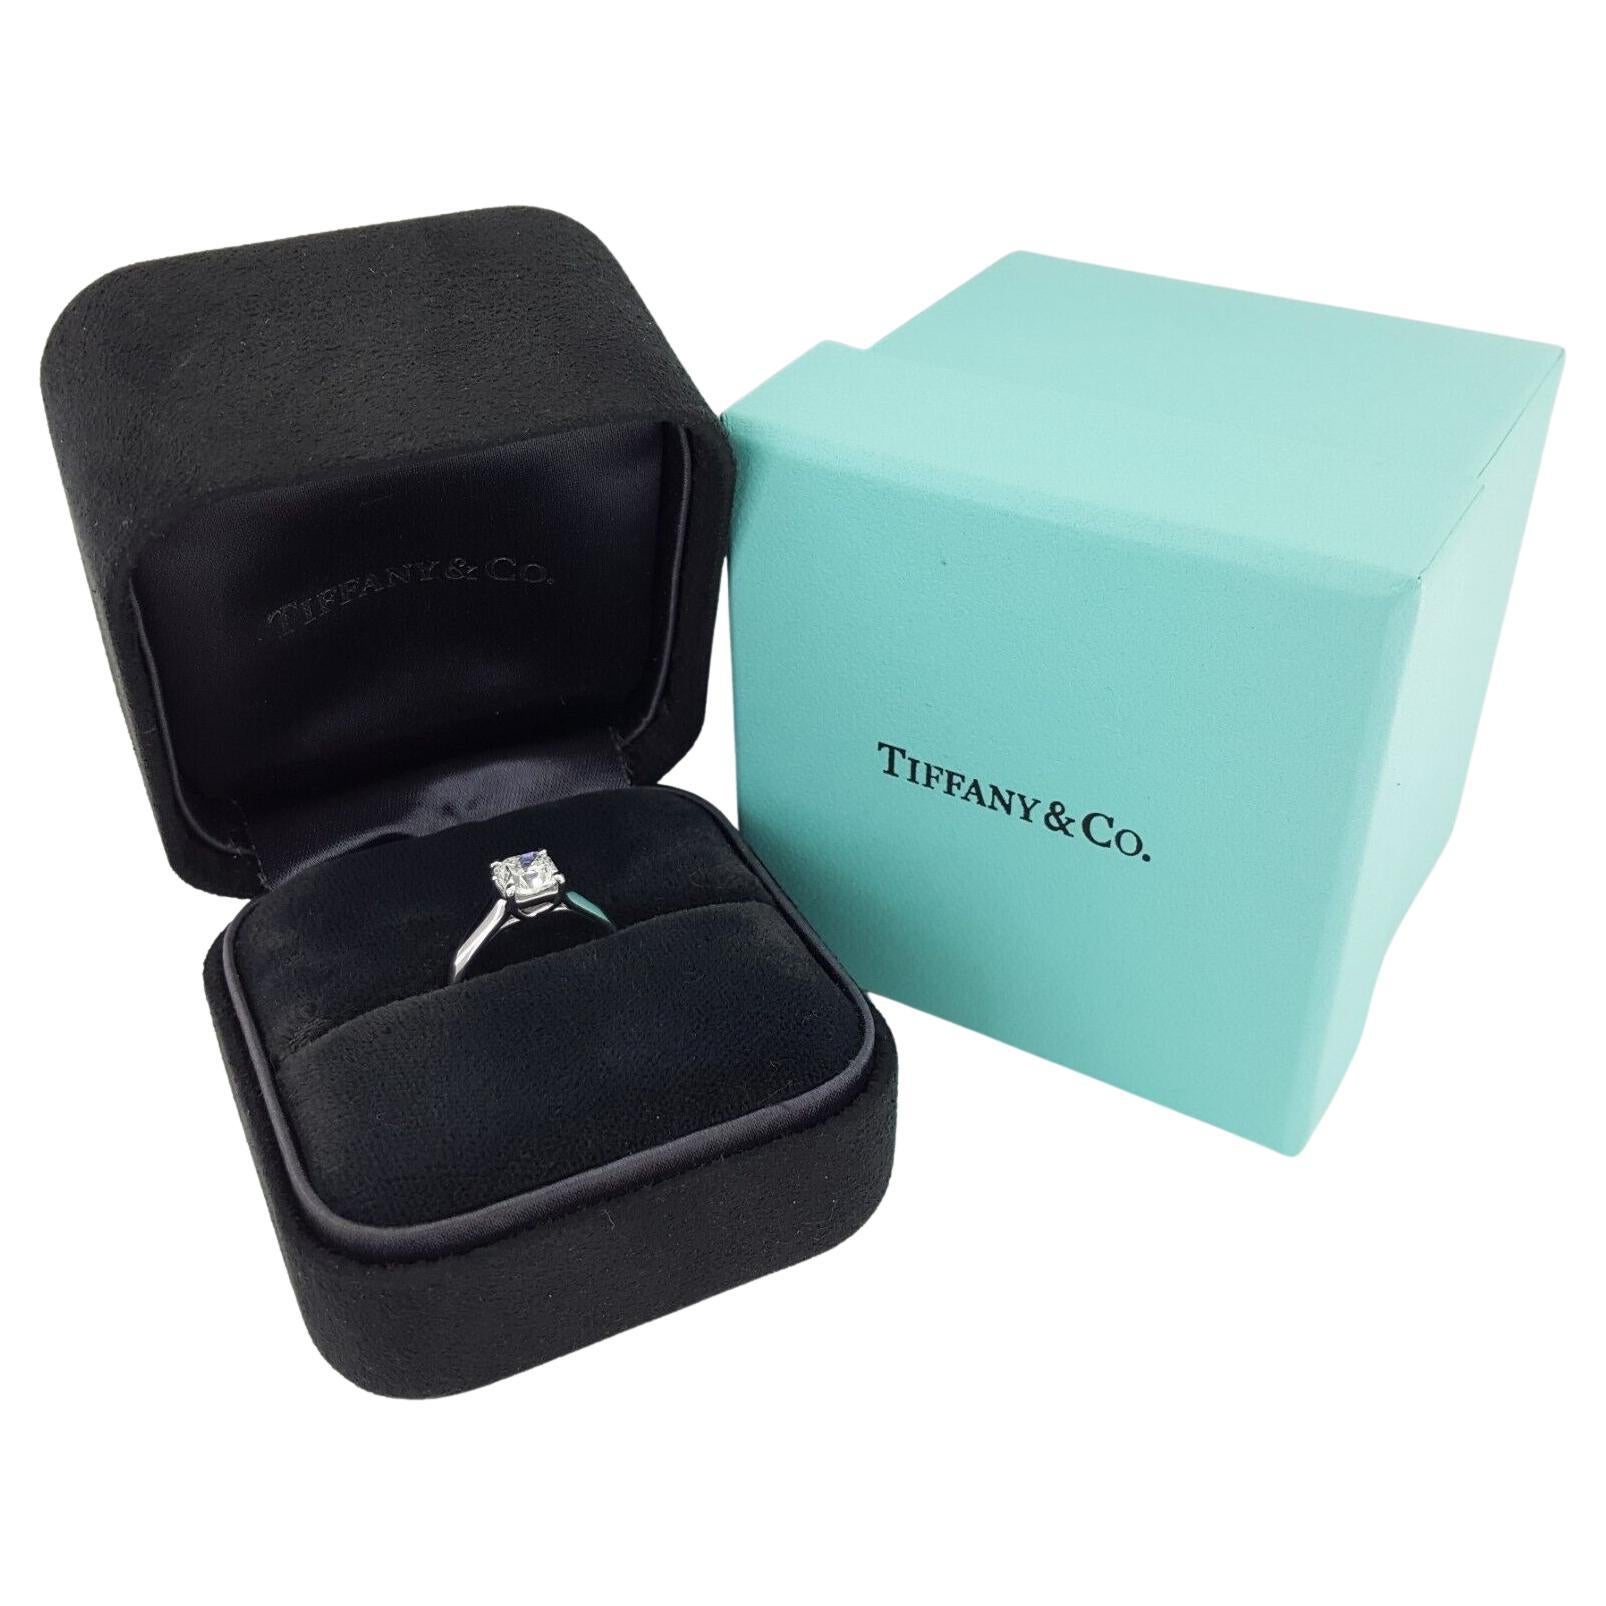 An exquisite Tiffany & Co. Lucida model platinum ring that comes with the Tiffany&Co paperwork